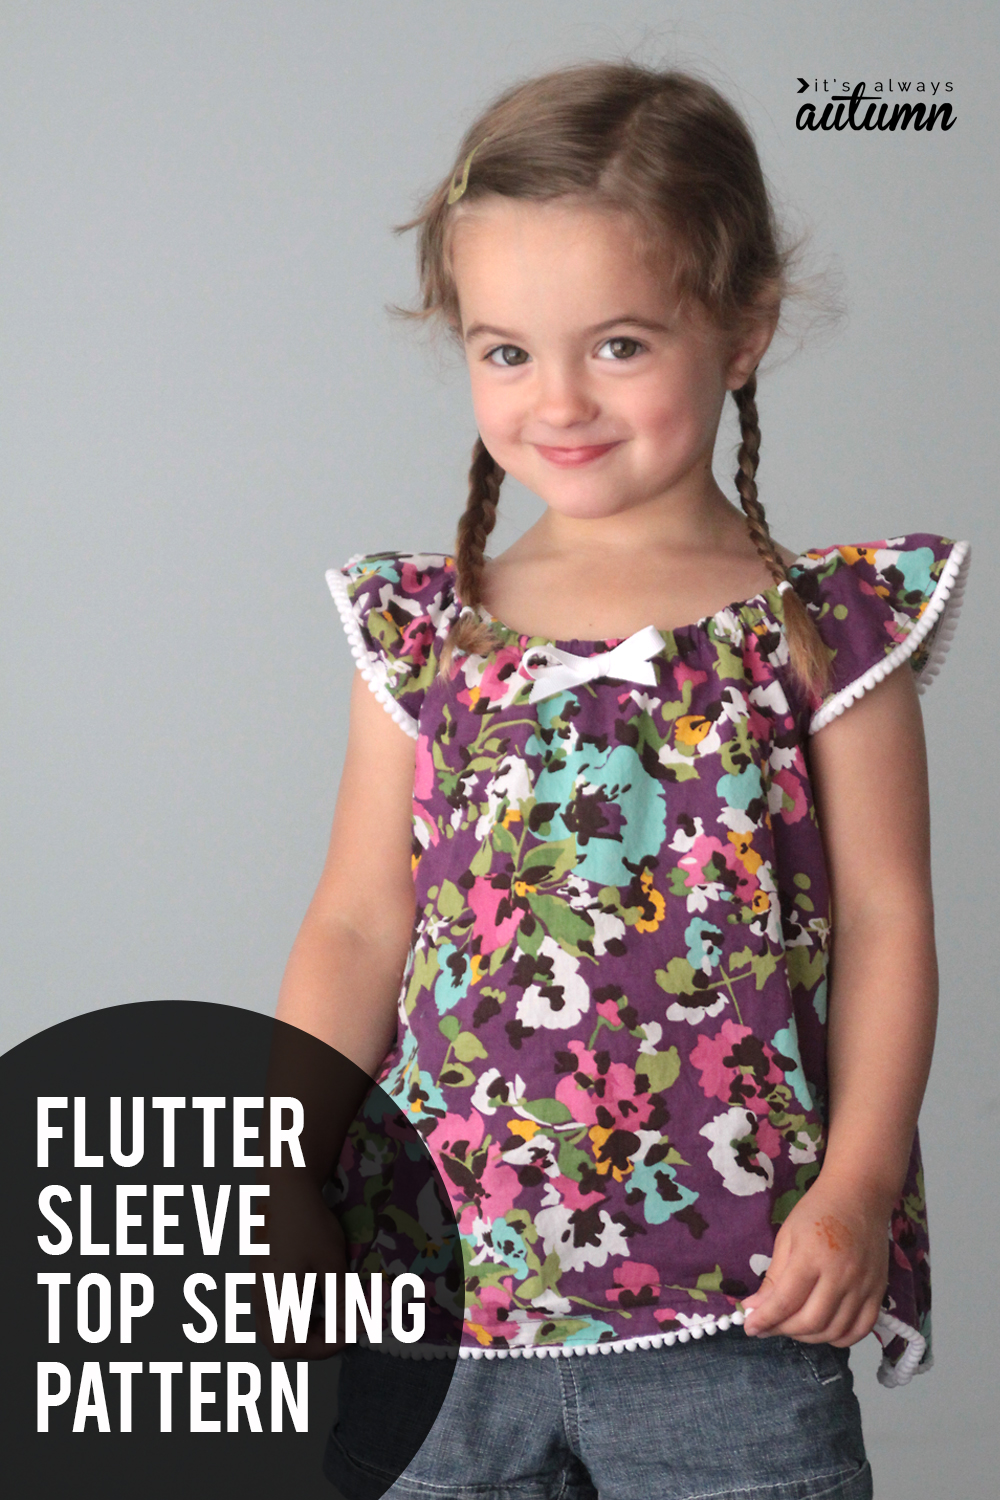 Free flutter sleeve top pattern! Click through for the free sewing pattern for this top (or dress) in size 4T.